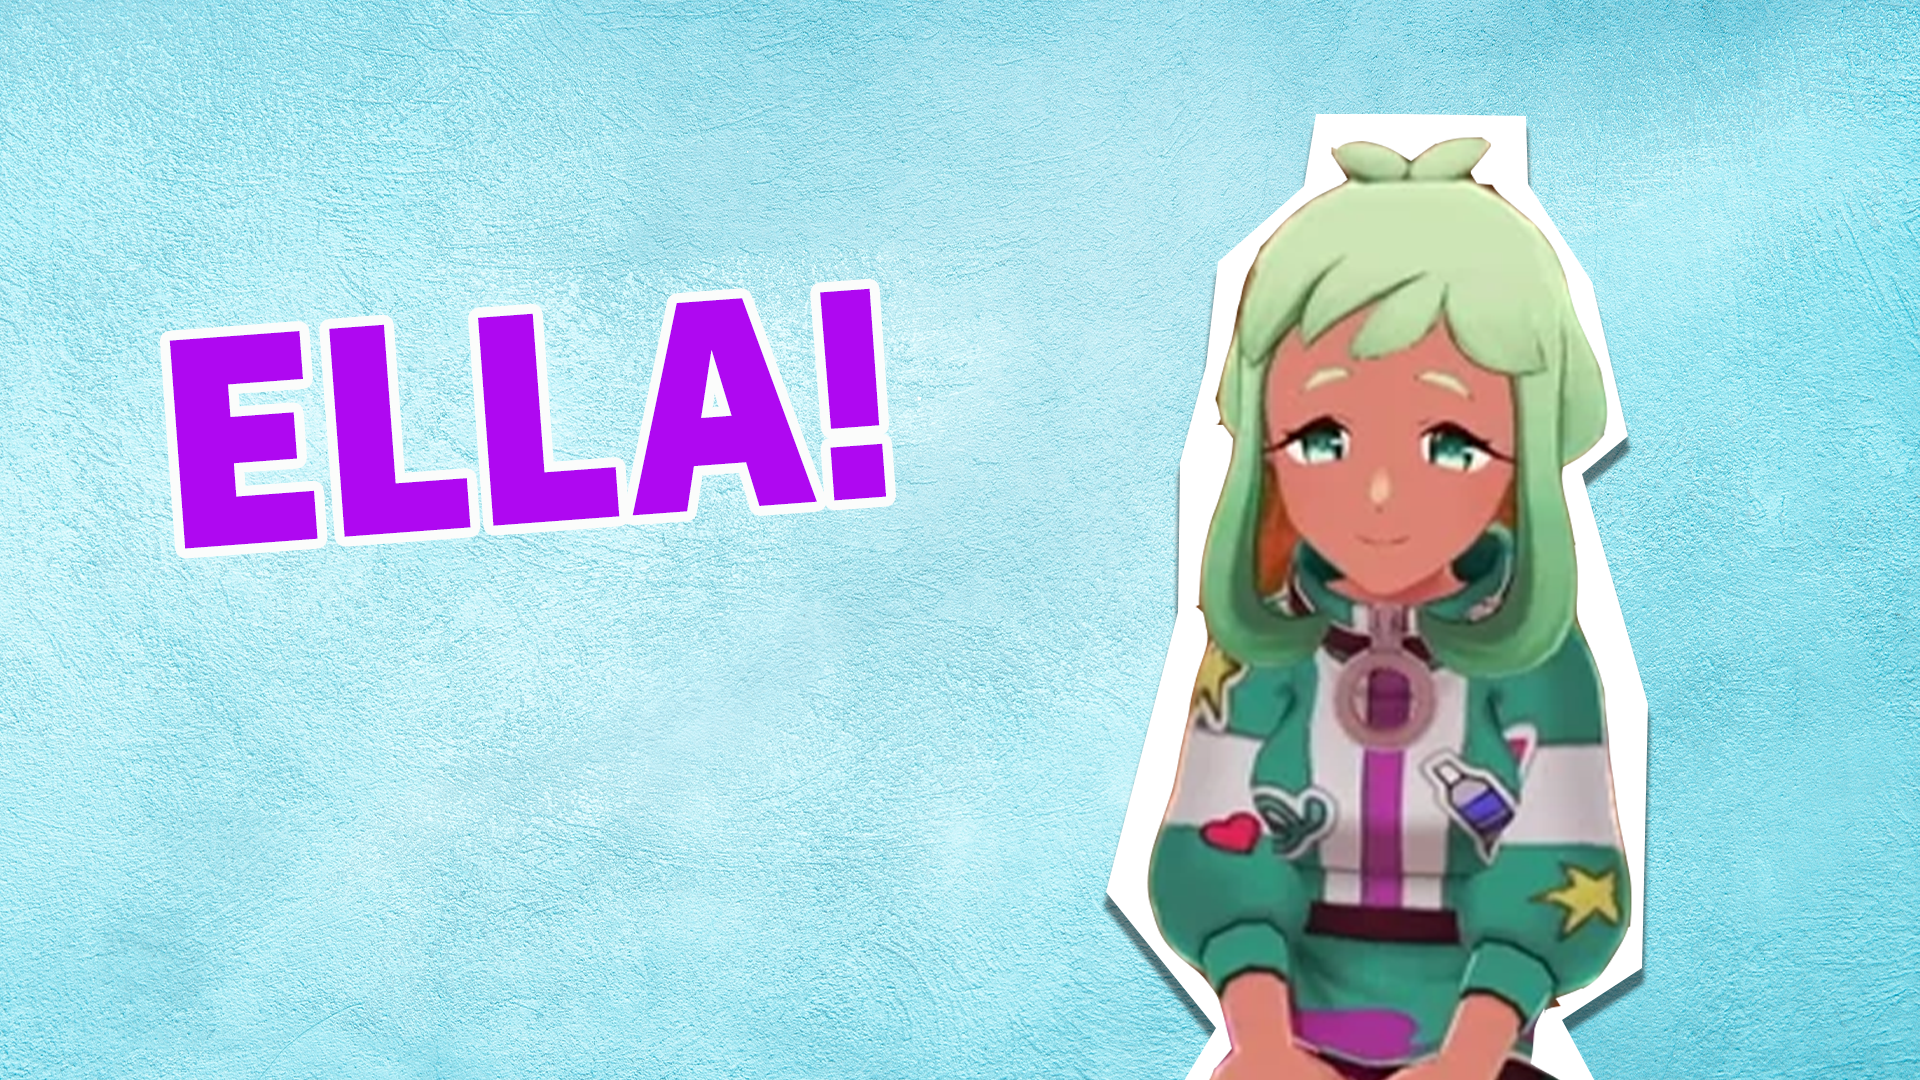 You're Ella! Just like Ella you're artistic and love getting creative, and you're also an optimist who always sees the bright side of everything!